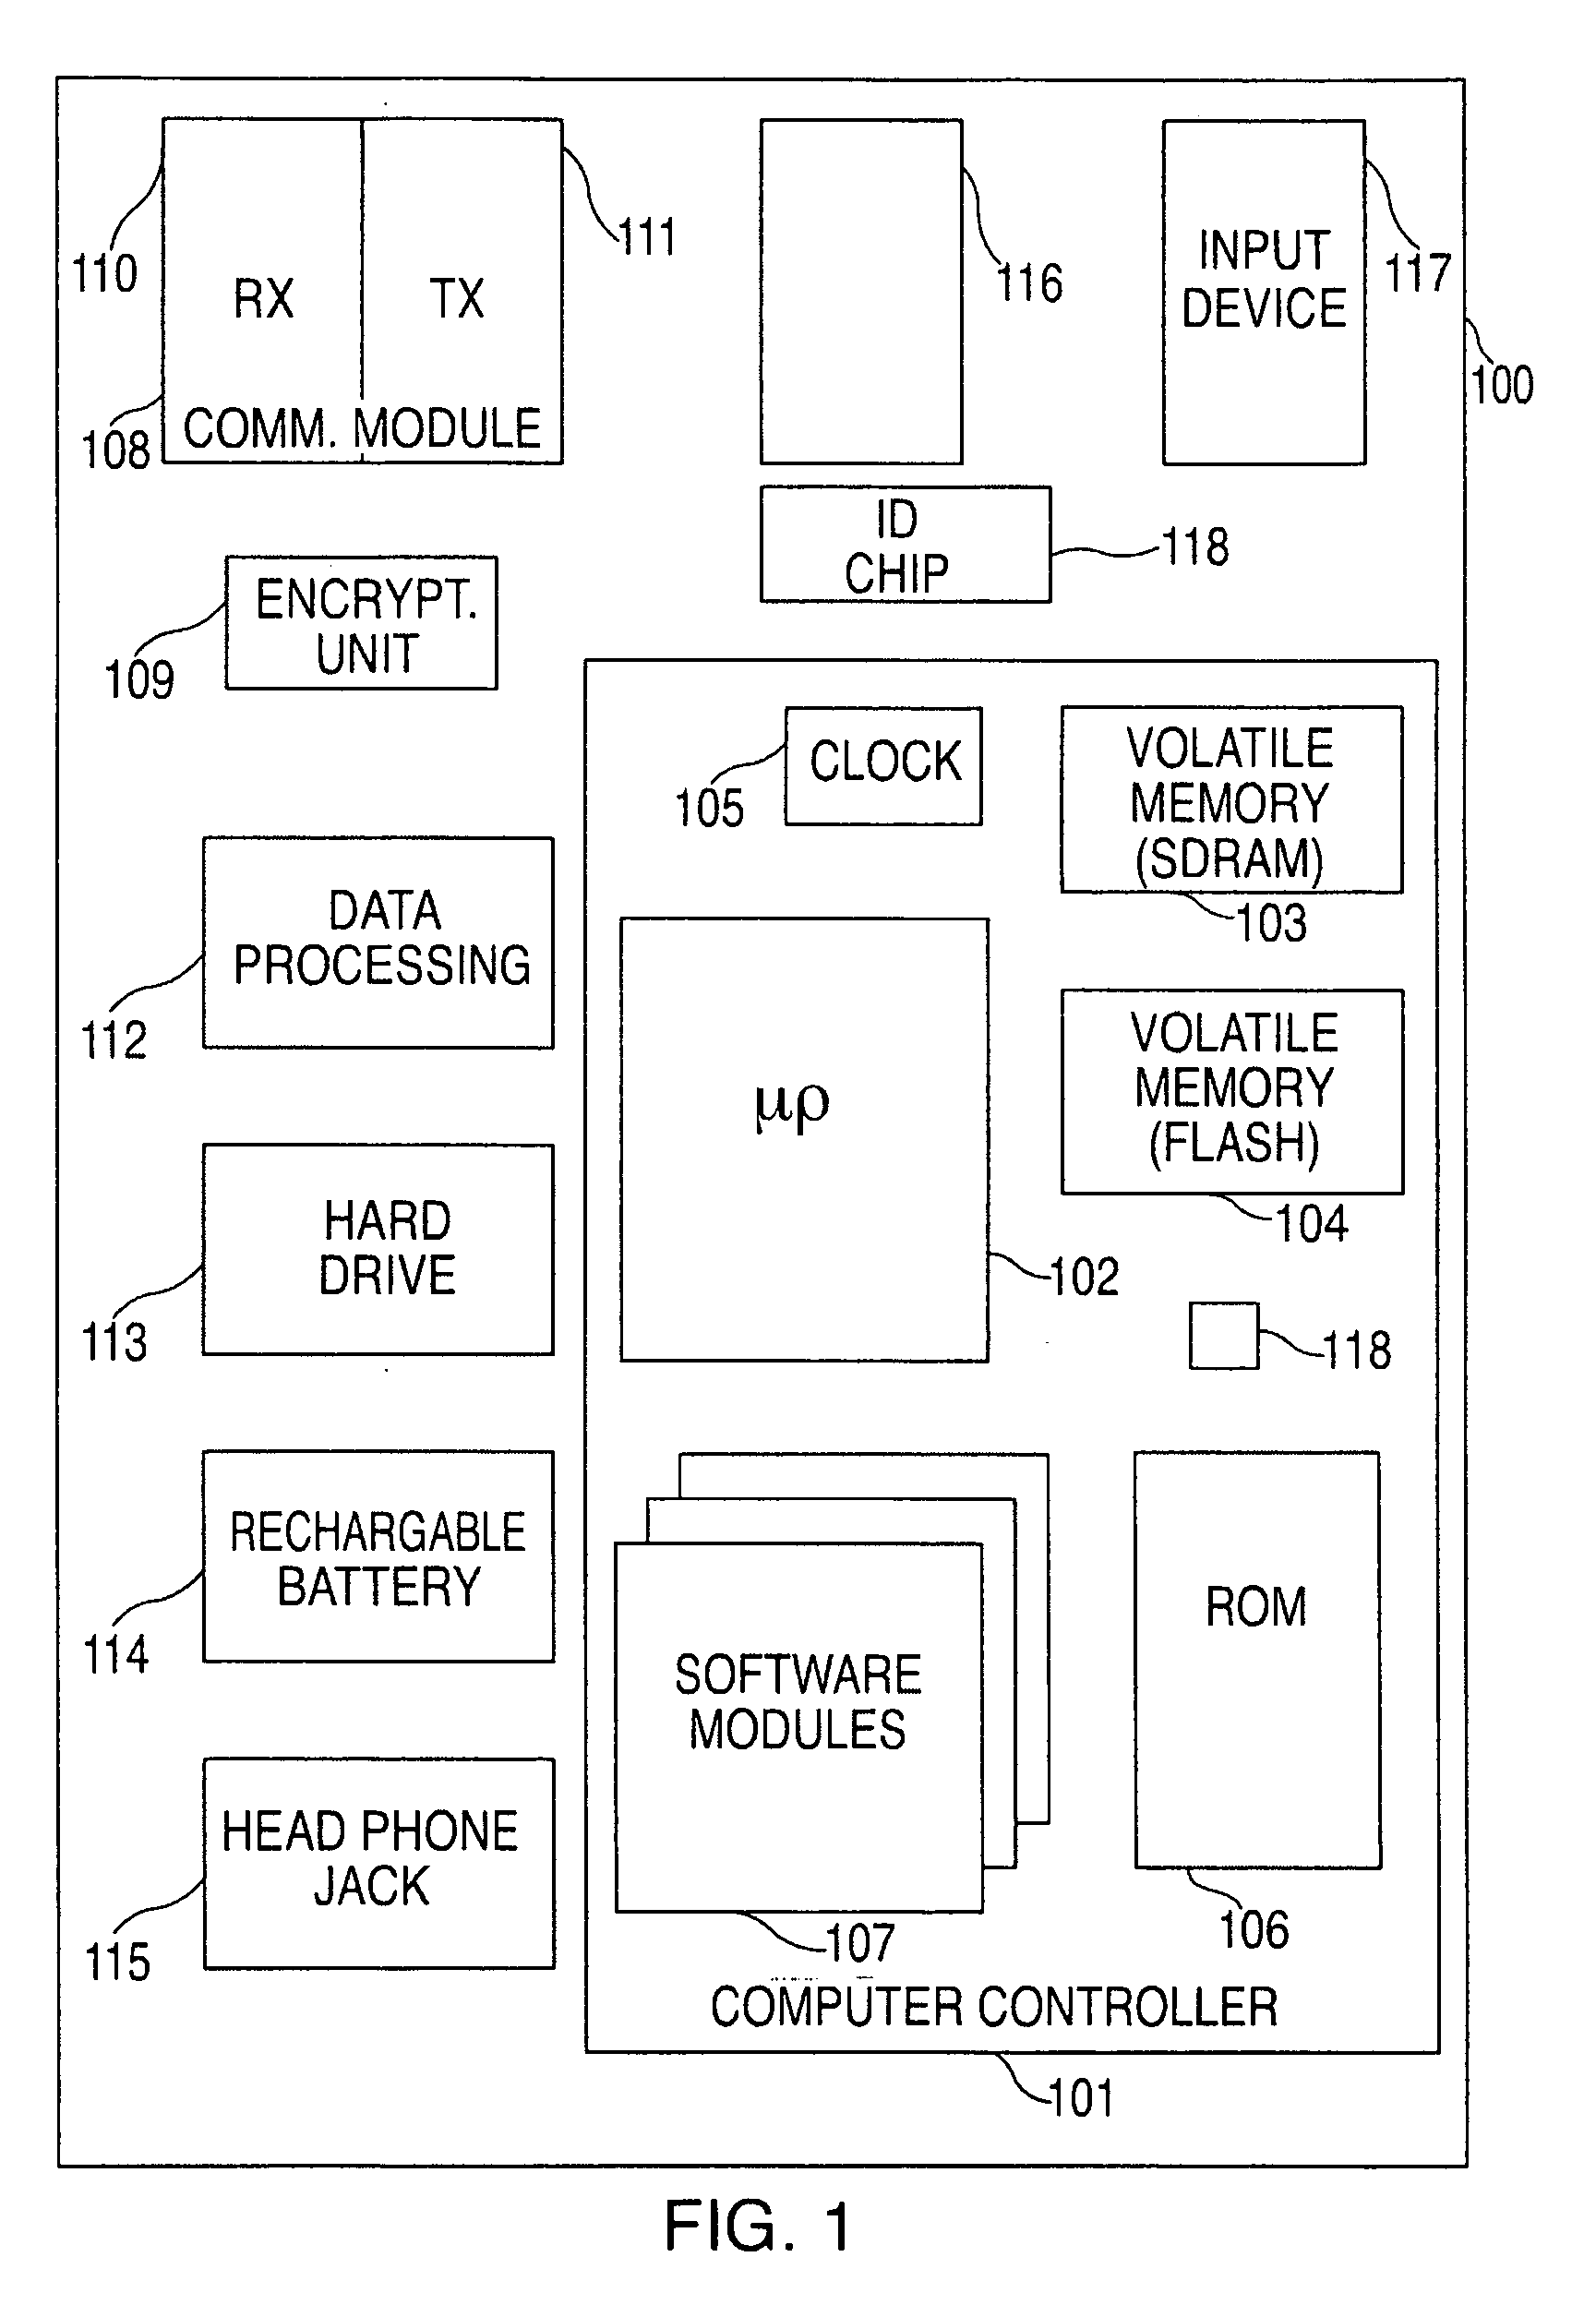 System sharing user content on a content-receiving device